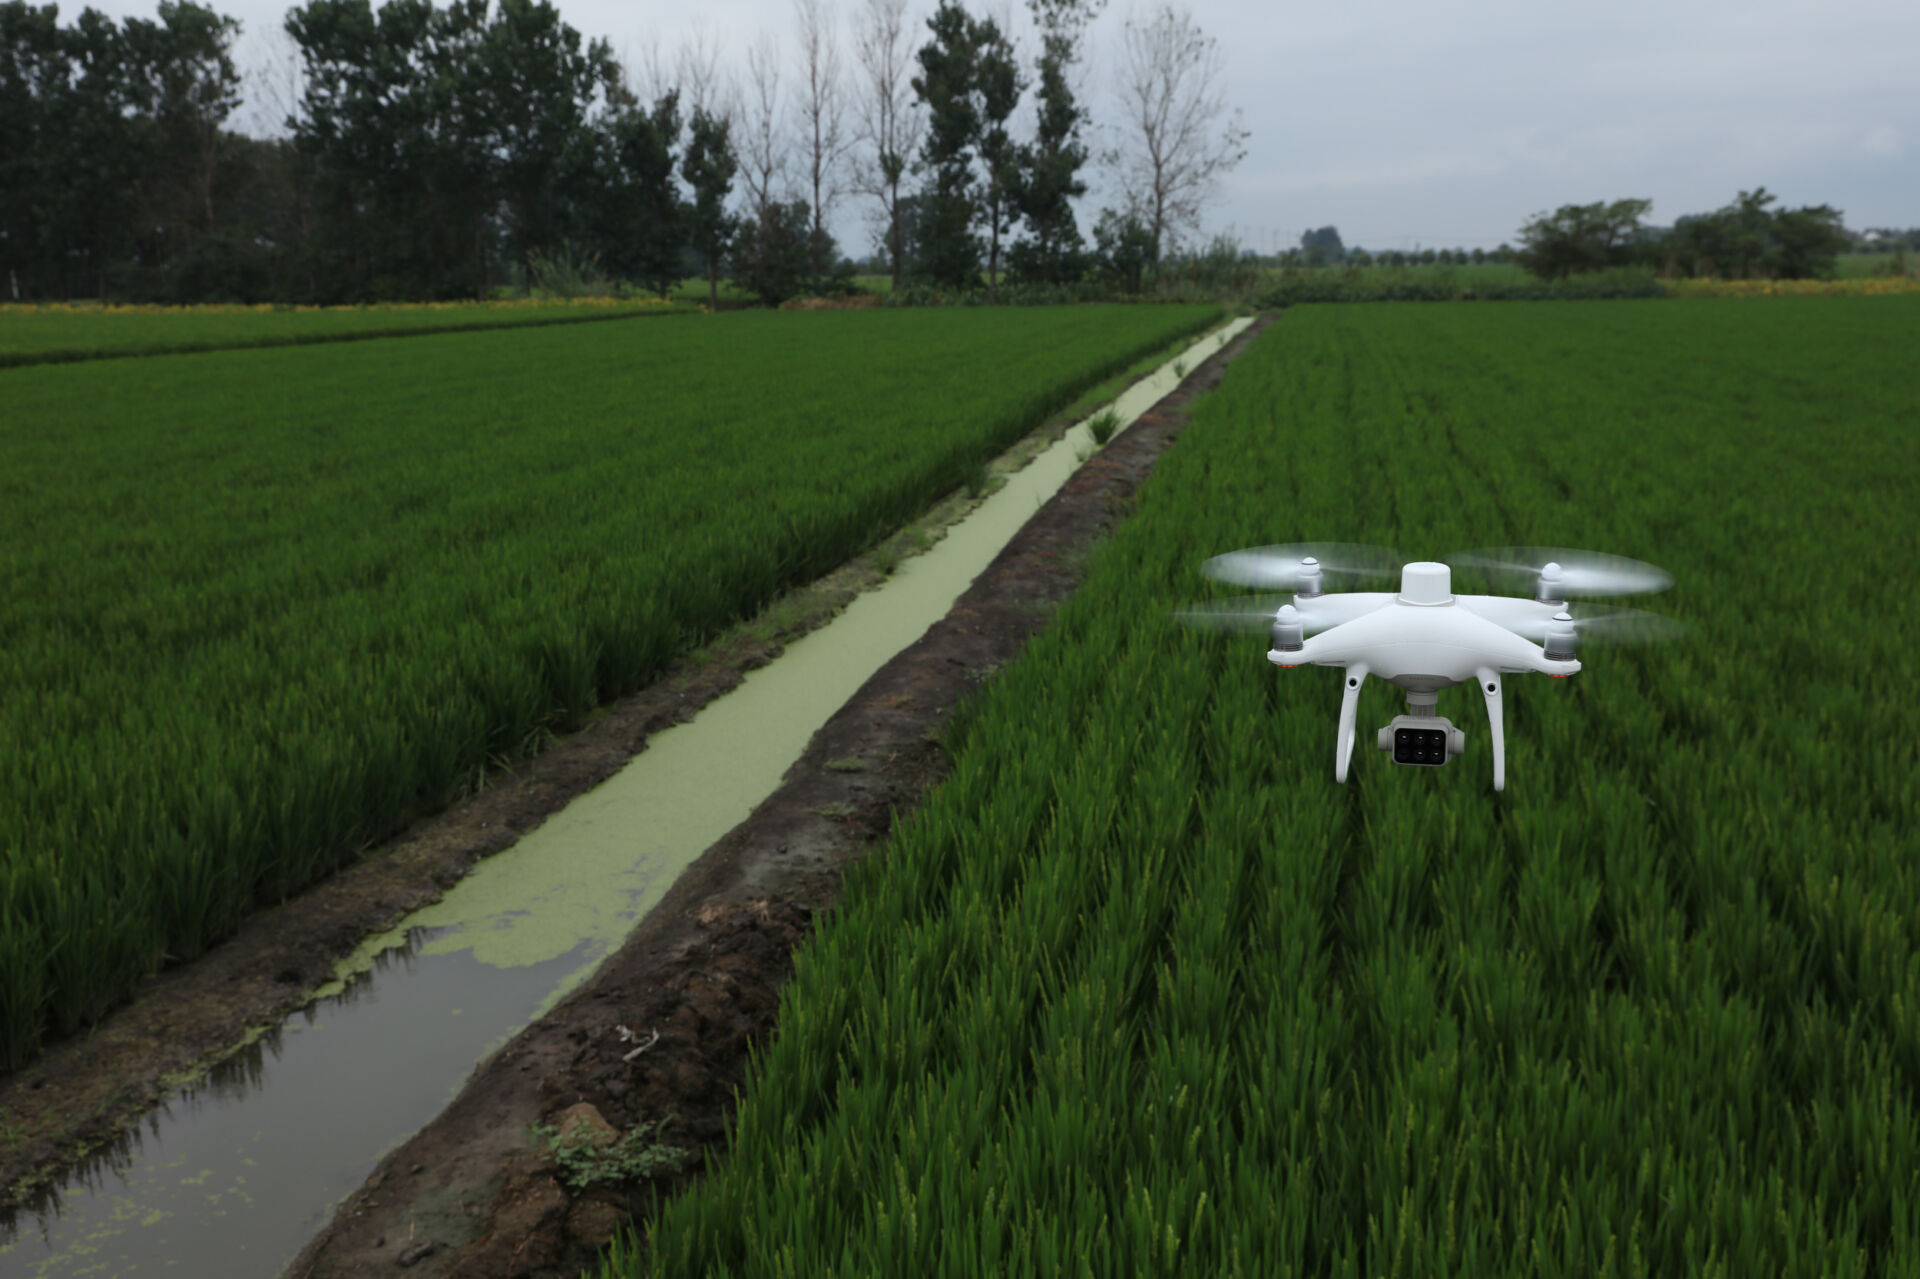 P4 Multispectral drone flying over green field with water as it inspects a farmer's crop